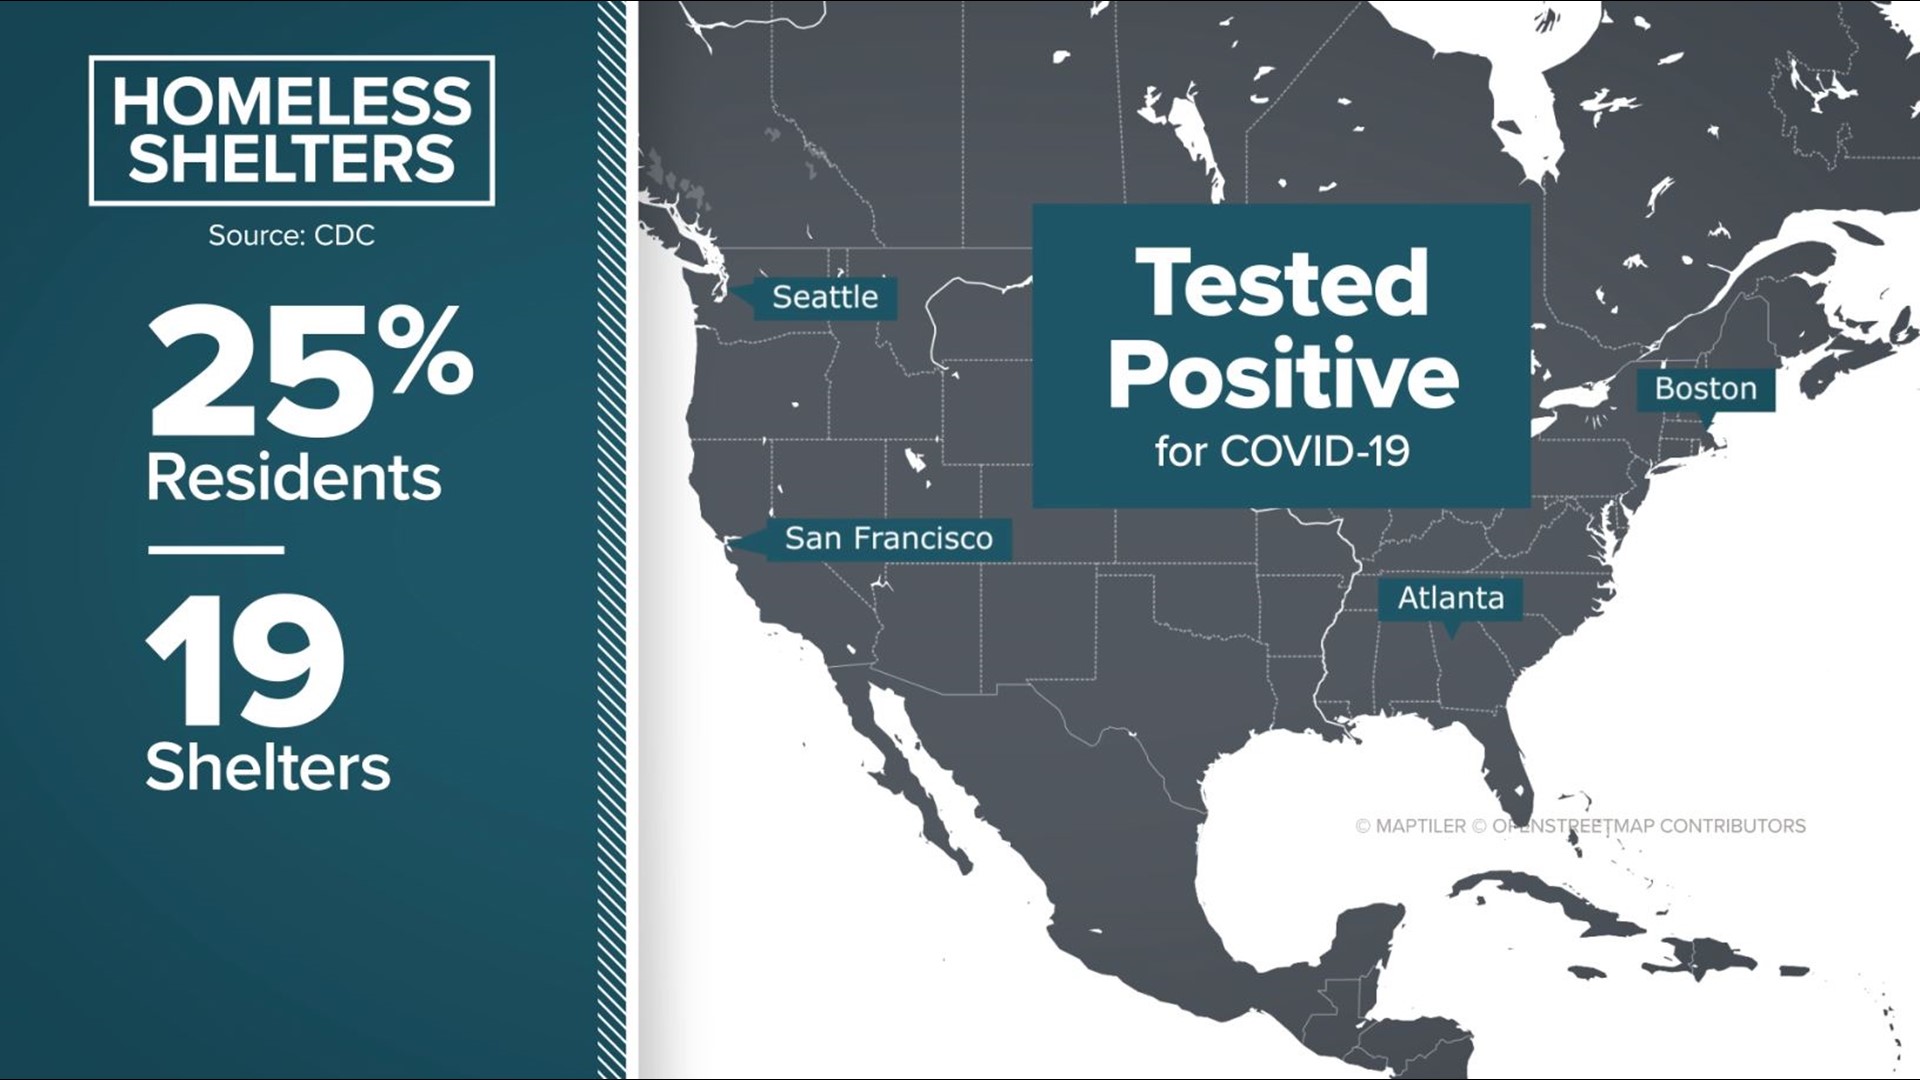 A large population of people already in poor health living on the street have serious coronavirus concerns.